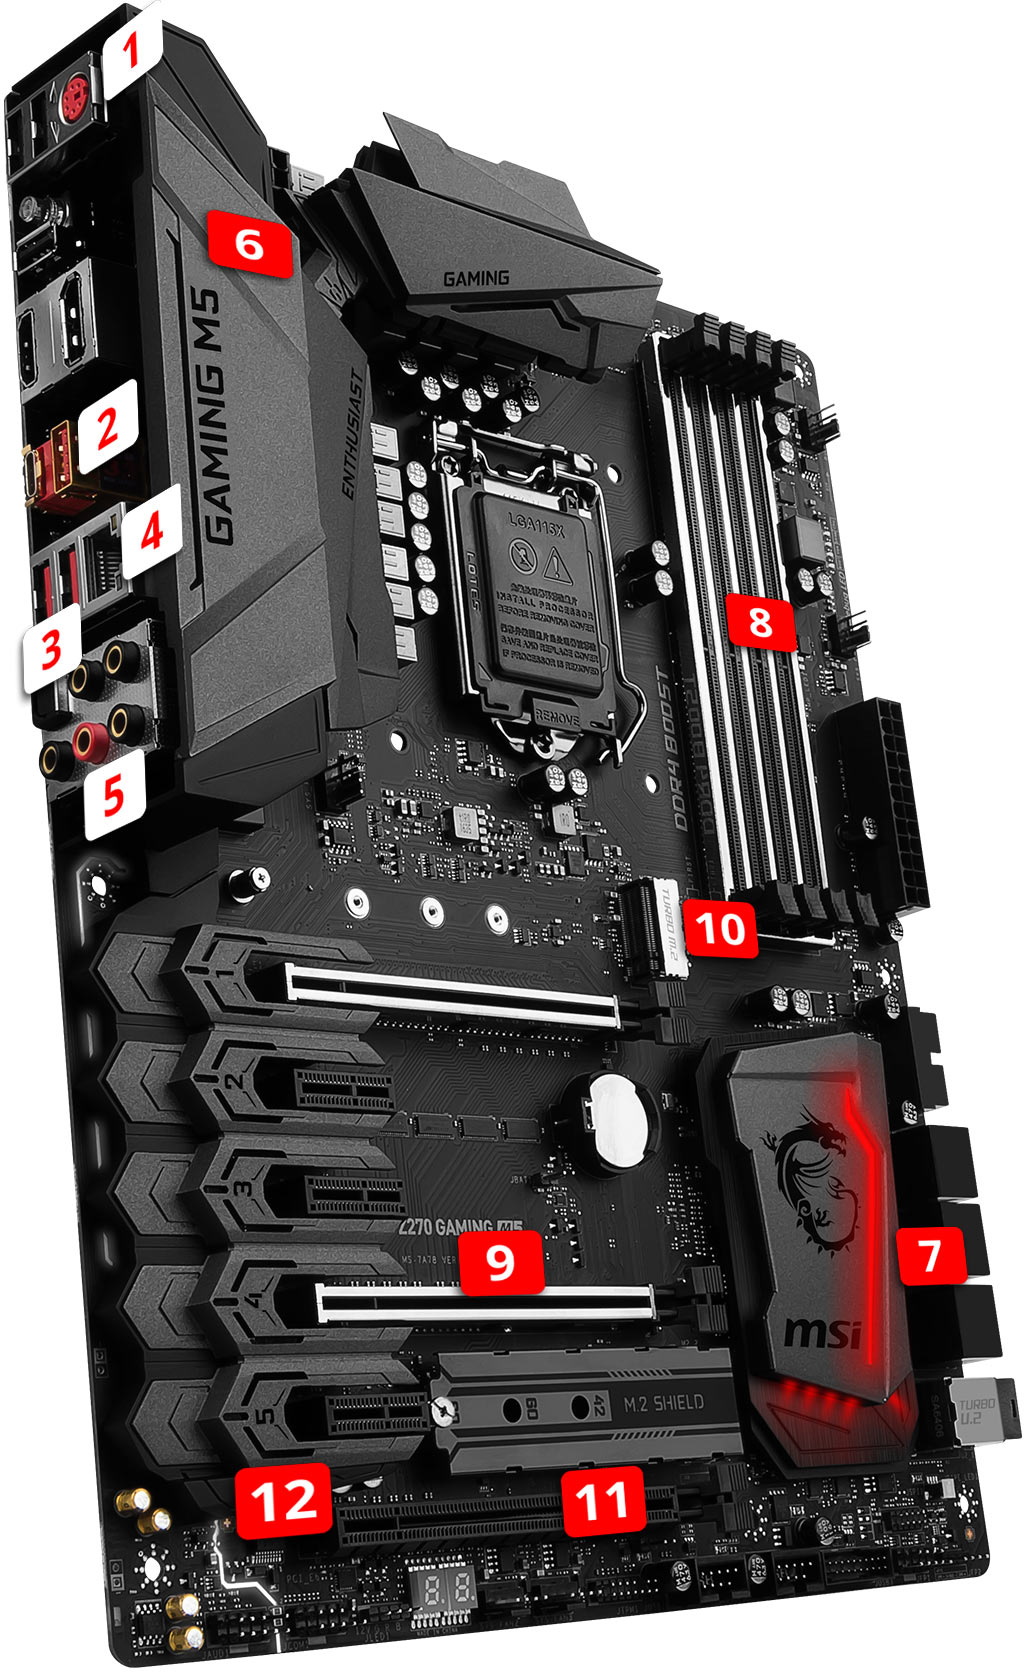 MSI Z270 GAMING M5 overview